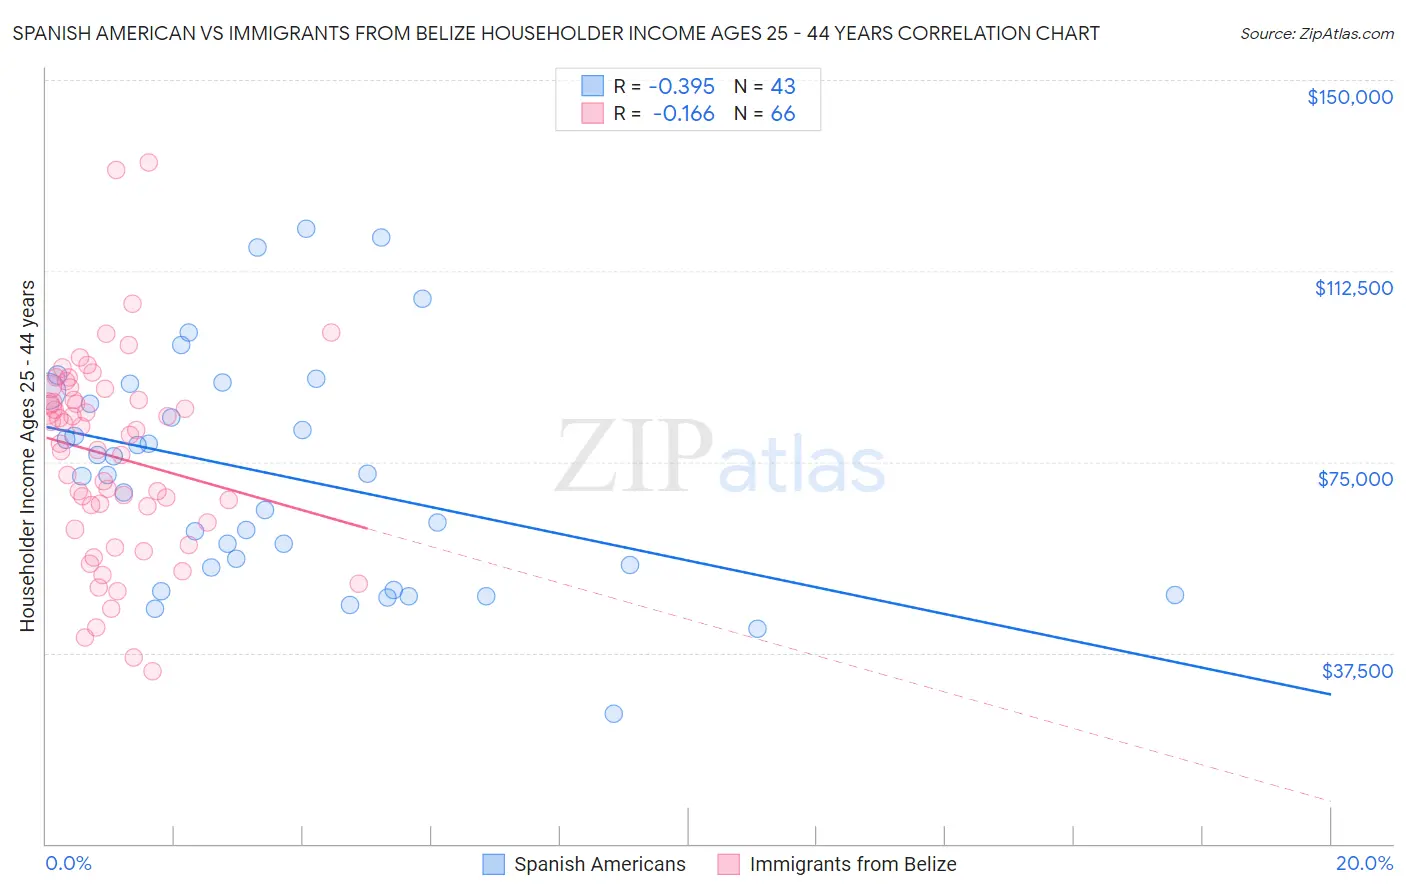 Spanish American vs Immigrants from Belize Householder Income Ages 25 - 44 years